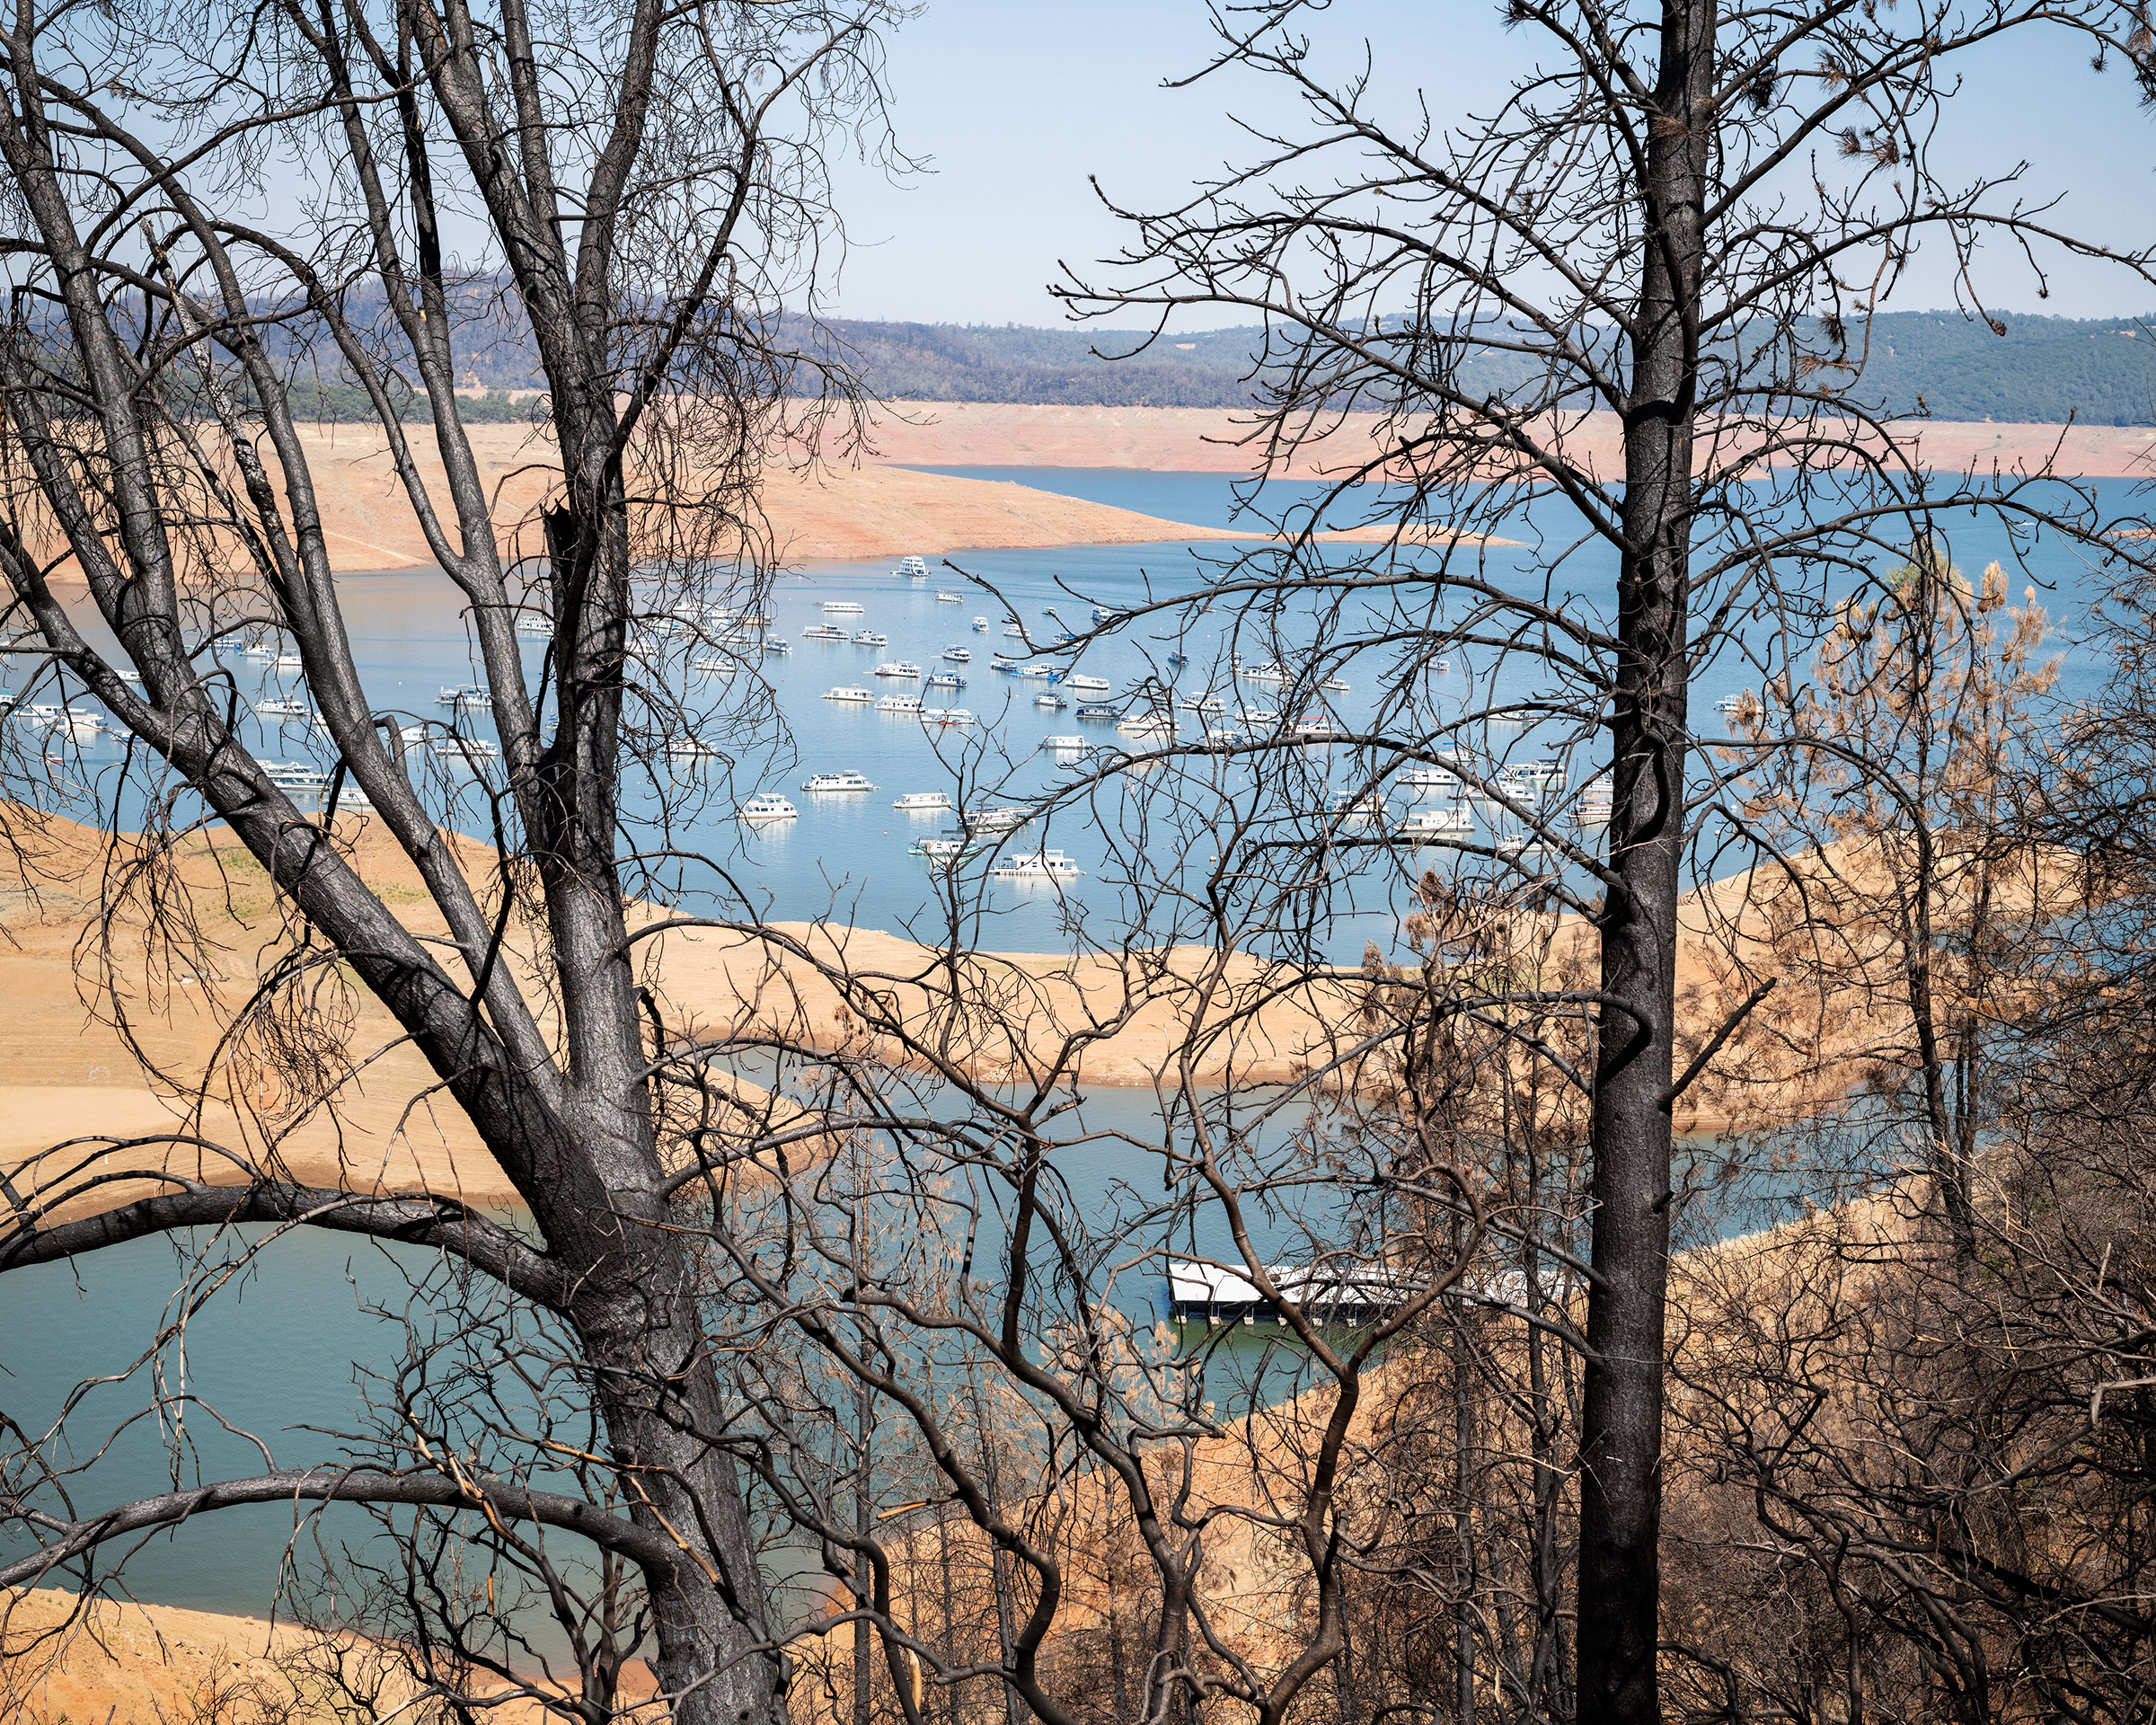 A view of Lake Oroville through trees burnt by a previous <a href="https://time.com/extreme-heat-climate-change/">fire season</a>, in Calif. on Jul. 2. (Adam Ferguson for TIME)